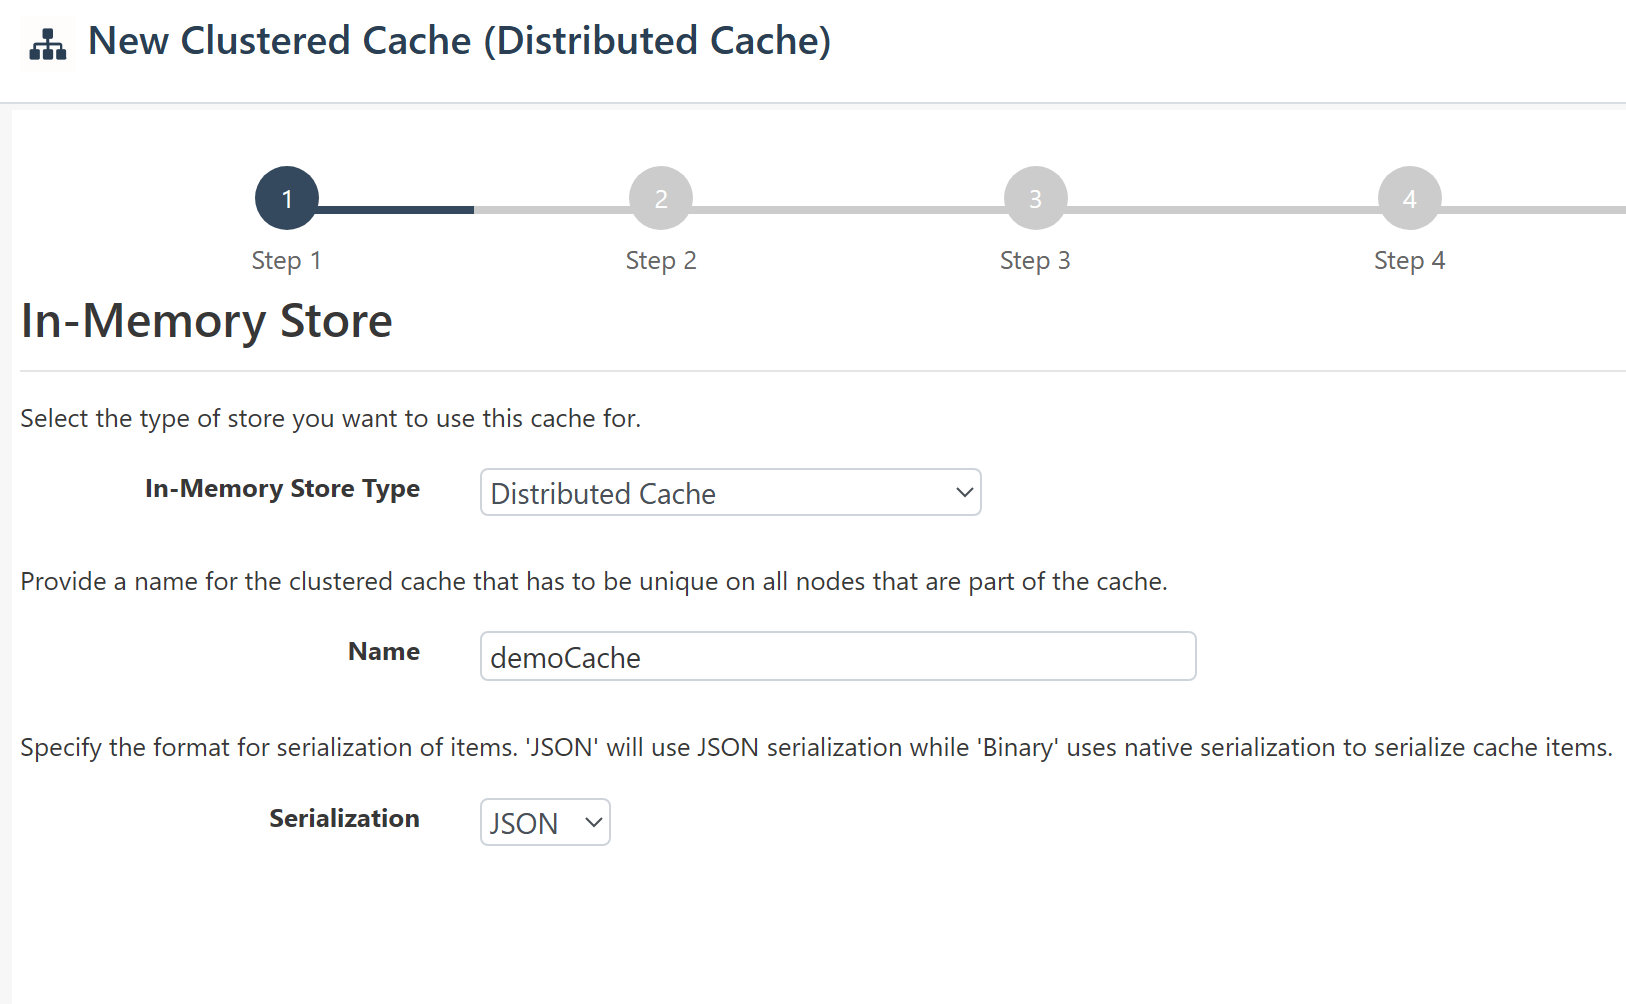 Define the in-memory store type, the name of the clustered cache, and the serialization type